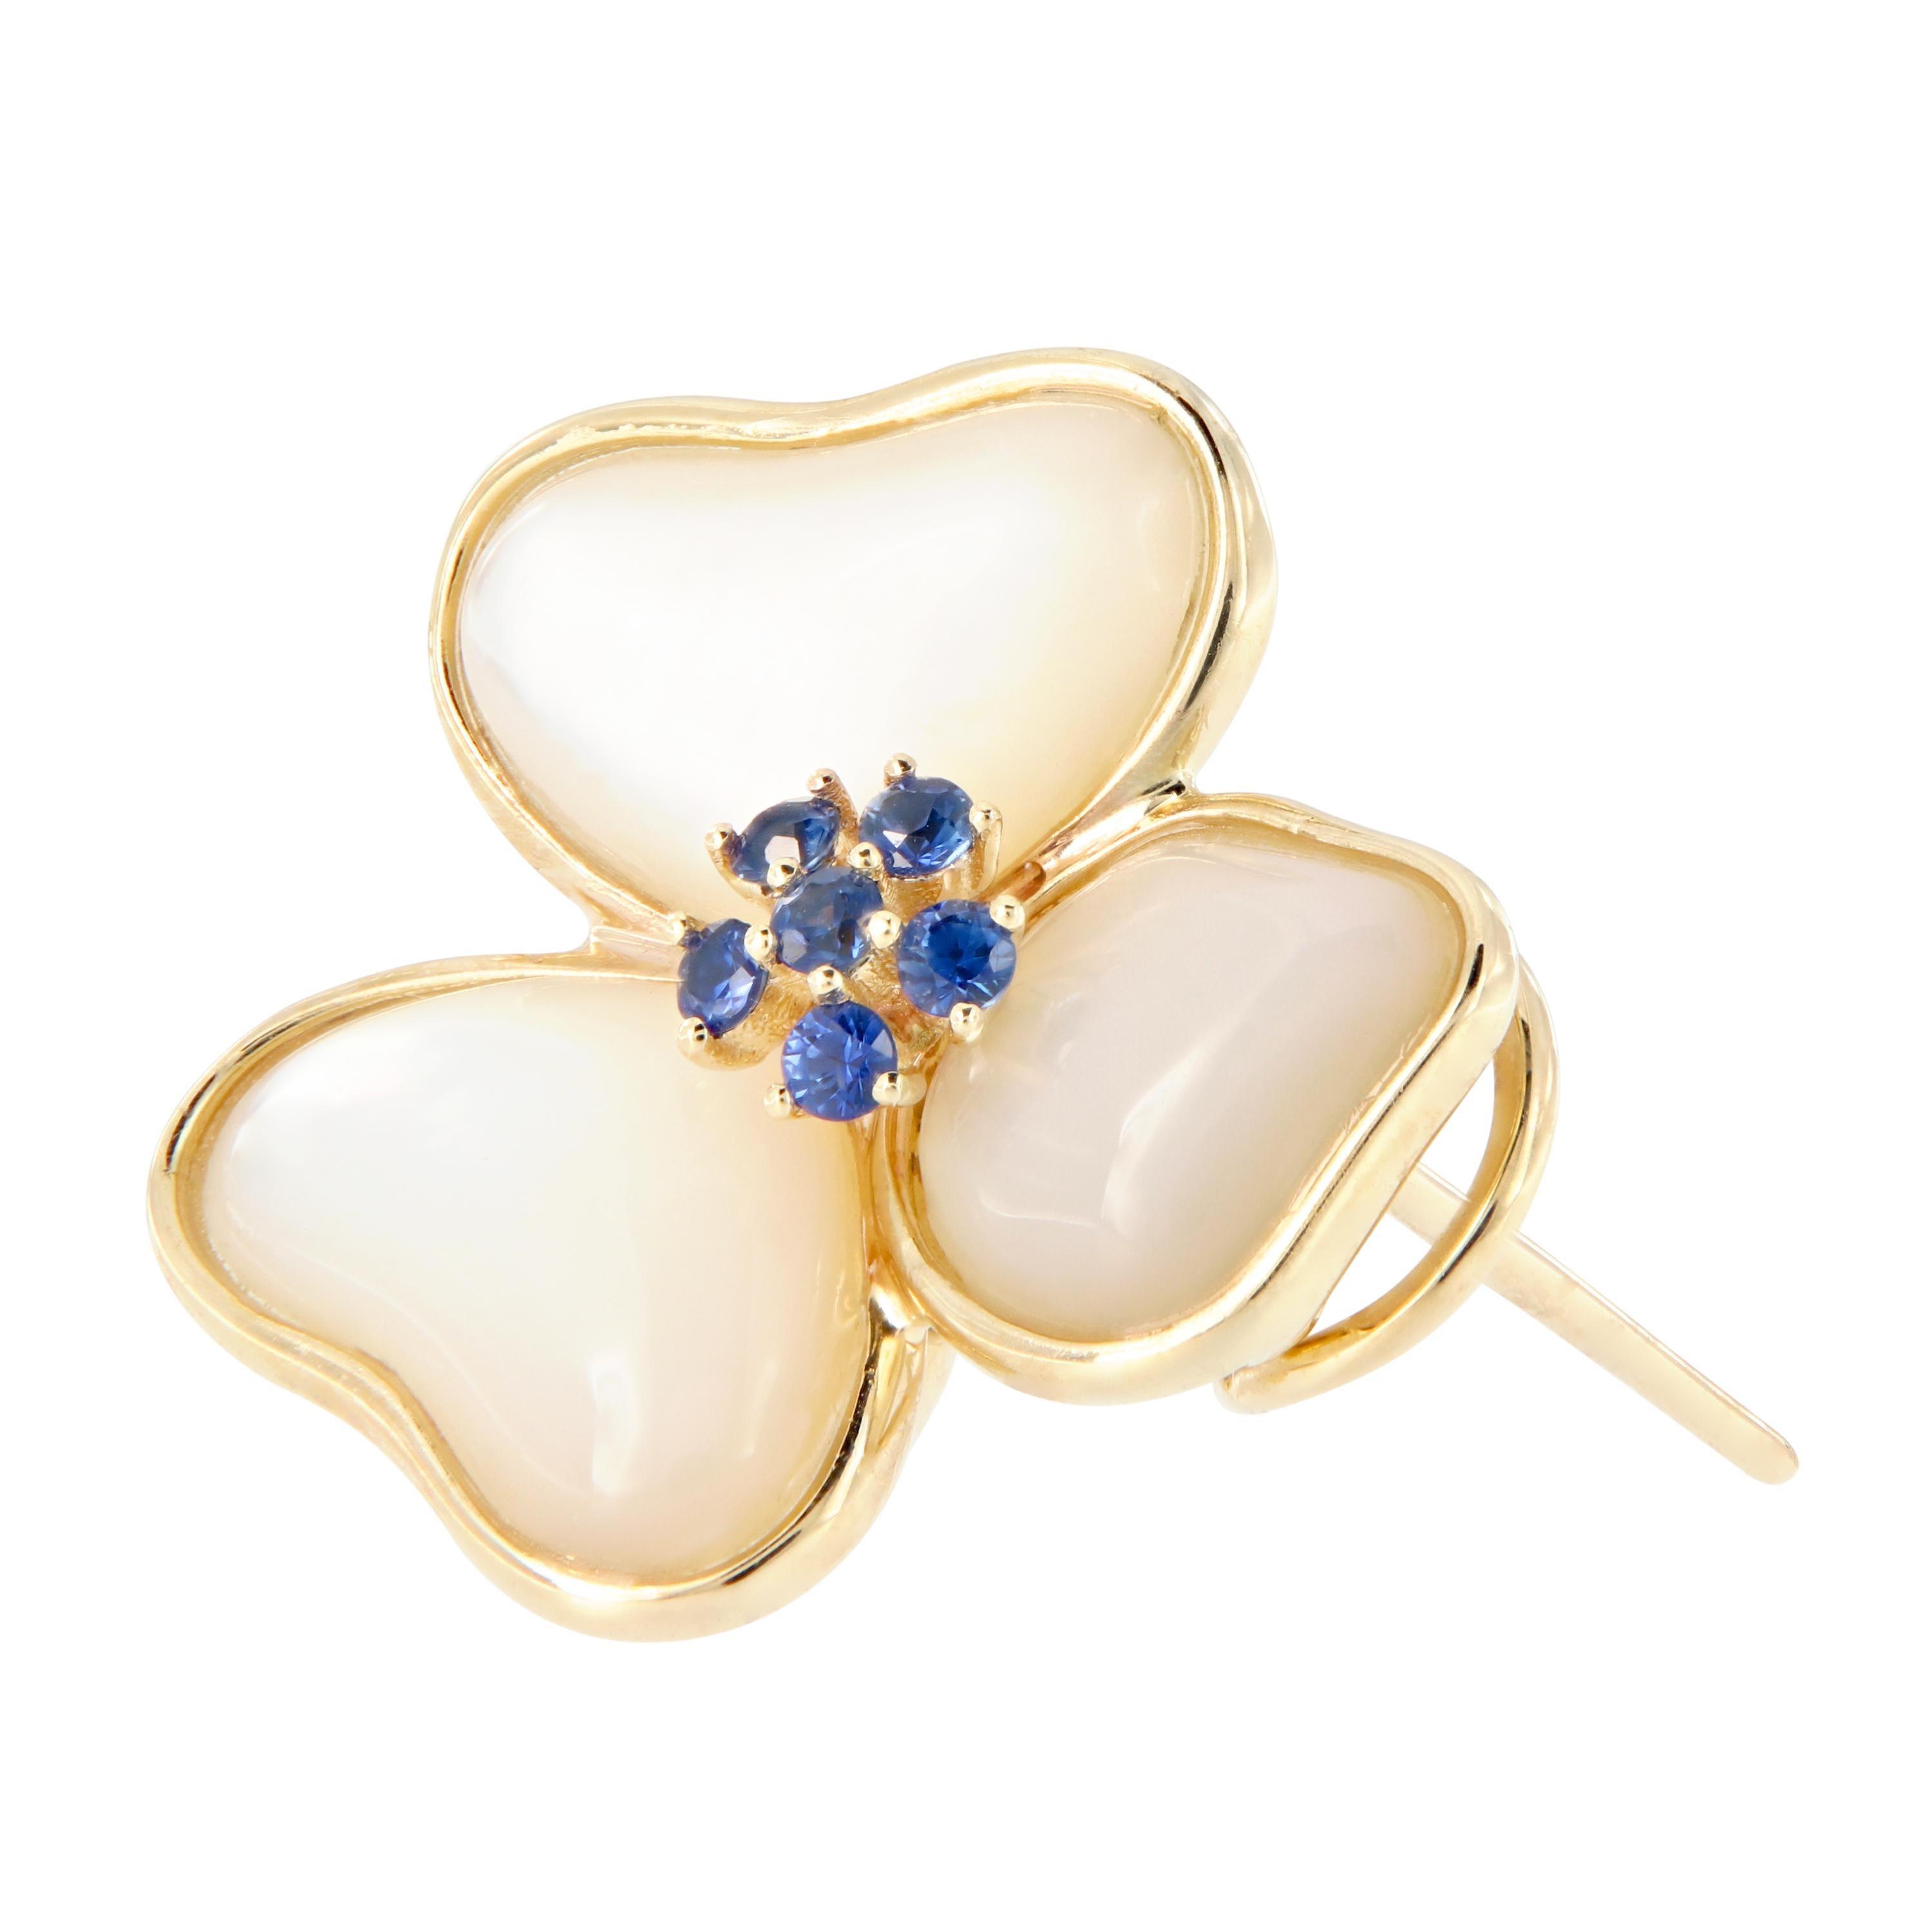 Pretty mother of pearl petals with 14k yellow gold trim and a central pistil set with blue sapphires. Weigh 8.6. Earrings are 20.5mm x 20.4mm.

Blue Sapphires 0.34 cttw